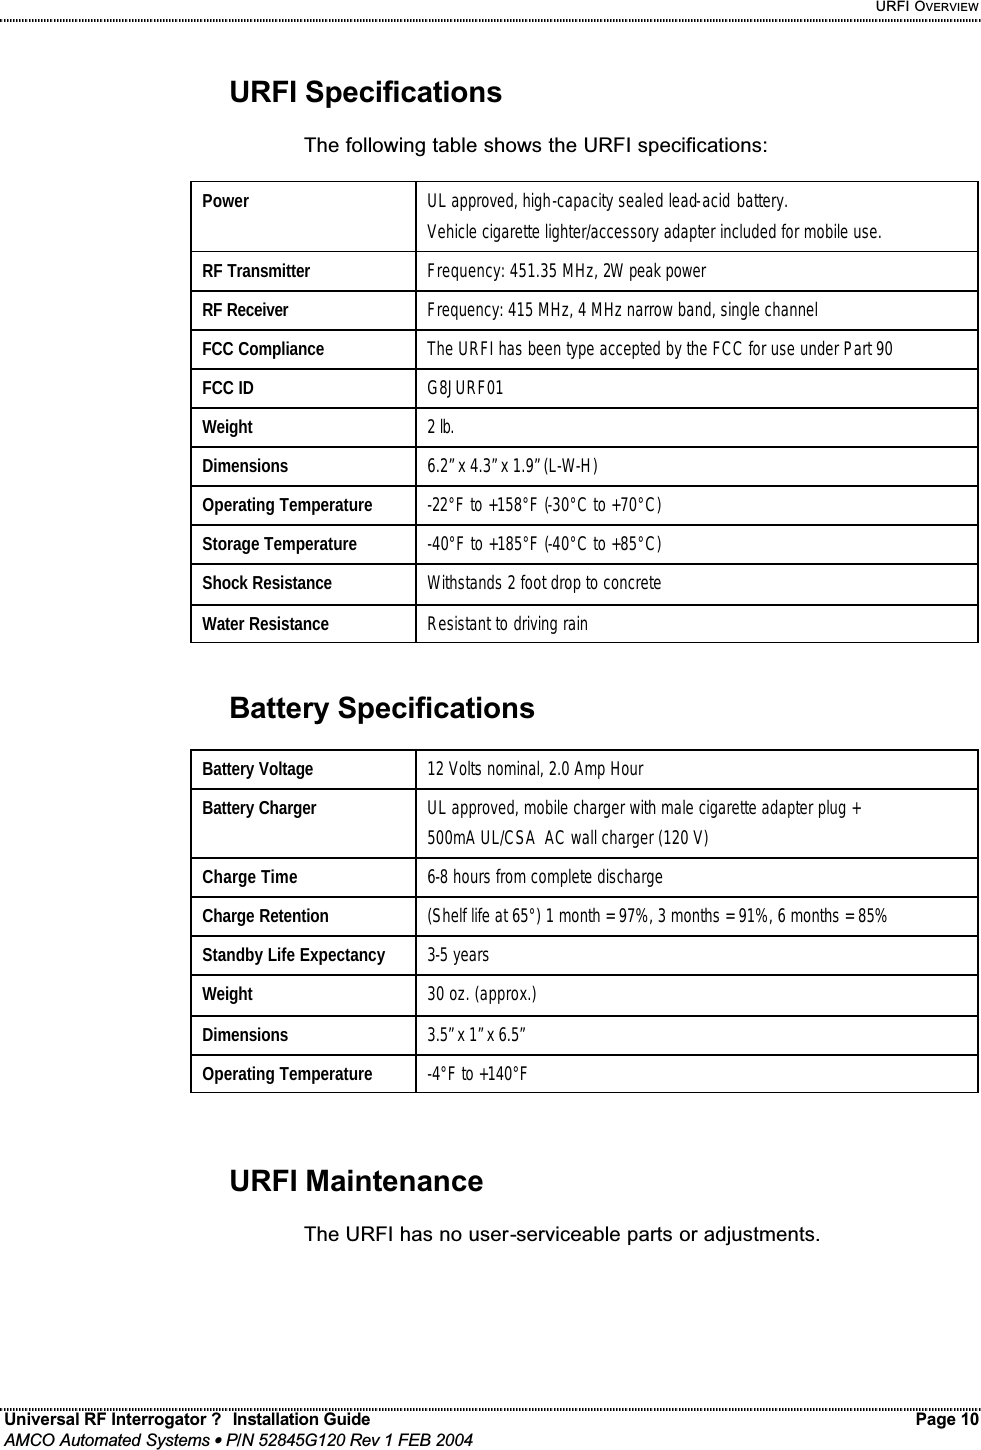     URFI OVERVIEW Universal RF Interrogator ?  Installation Guide    Page 10  AMCO Automated Systems • P/N 52845G120 Rev 1 FEB 2004                                                                                                                                 URFI Specifications  The following table shows the URFI specifications:  Power   UL approved, high-capacity sealed lead-acid battery. Vehicle cigarette lighter/accessory adapter included for mobile use. RF Transmitter  Frequency: 451.35 MHz, 2W peak power RF Receiver  Frequency: 415 MHz, 4 MHz narrow band, single channel FCC Compliance  The URFI has been type accepted by the FCC for use under Part 90 FCC ID  G8JURF01 Weight  2 lb. Dimensions  6.2” x 4.3” x 1.9” (L-W-H) Operating Temperature  -22°F to +158°F (-30°C to +70°C) Storage Temperature  -40°F to +185°F (-40°C to +85°C) Shock Resistance  Withstands 2 foot drop to concrete Water Resistance  Resistant to driving rain   Battery Specifications  Battery Voltage  12 Volts nominal, 2.0 Amp Hour Battery Charger  UL approved, mobile charger with male cigarette adapter plug + 500mA UL/CSA  AC wall charger (120 V) Charge Time  6-8 hours from complete discharge Charge Retention  (Shelf life at 65°) 1 month = 97%, 3 months = 91%, 6 months = 85%  Standby Life Expectancy  3-5 years Weight  30 oz. (approx.) Dimensions  3.5” x 1” x 6.5” Operating Temperature  -4°F to +140°F    URFI Maintenance  The URFI has no user-serviceable parts or adjustments. 